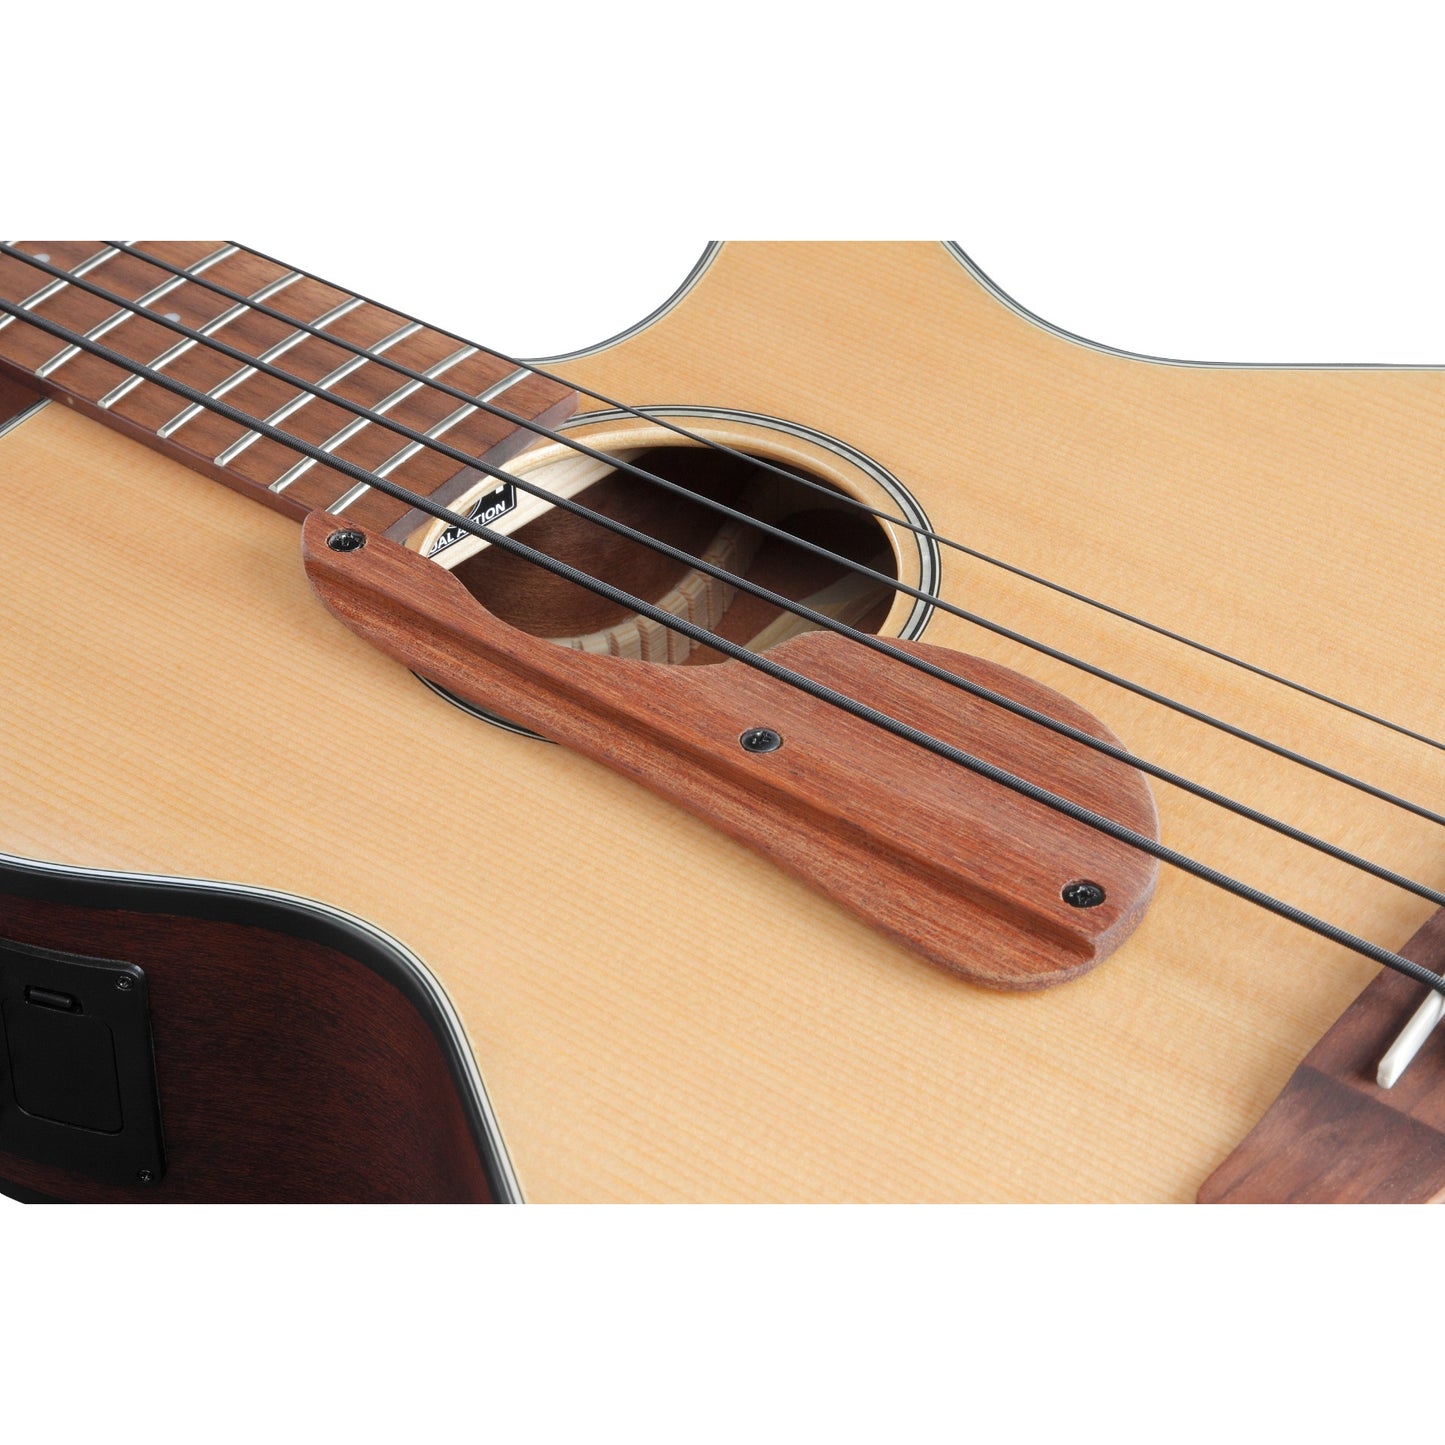 Ibanez AEGB30ENTG Acoustic Electric Bass Guitar in Natural